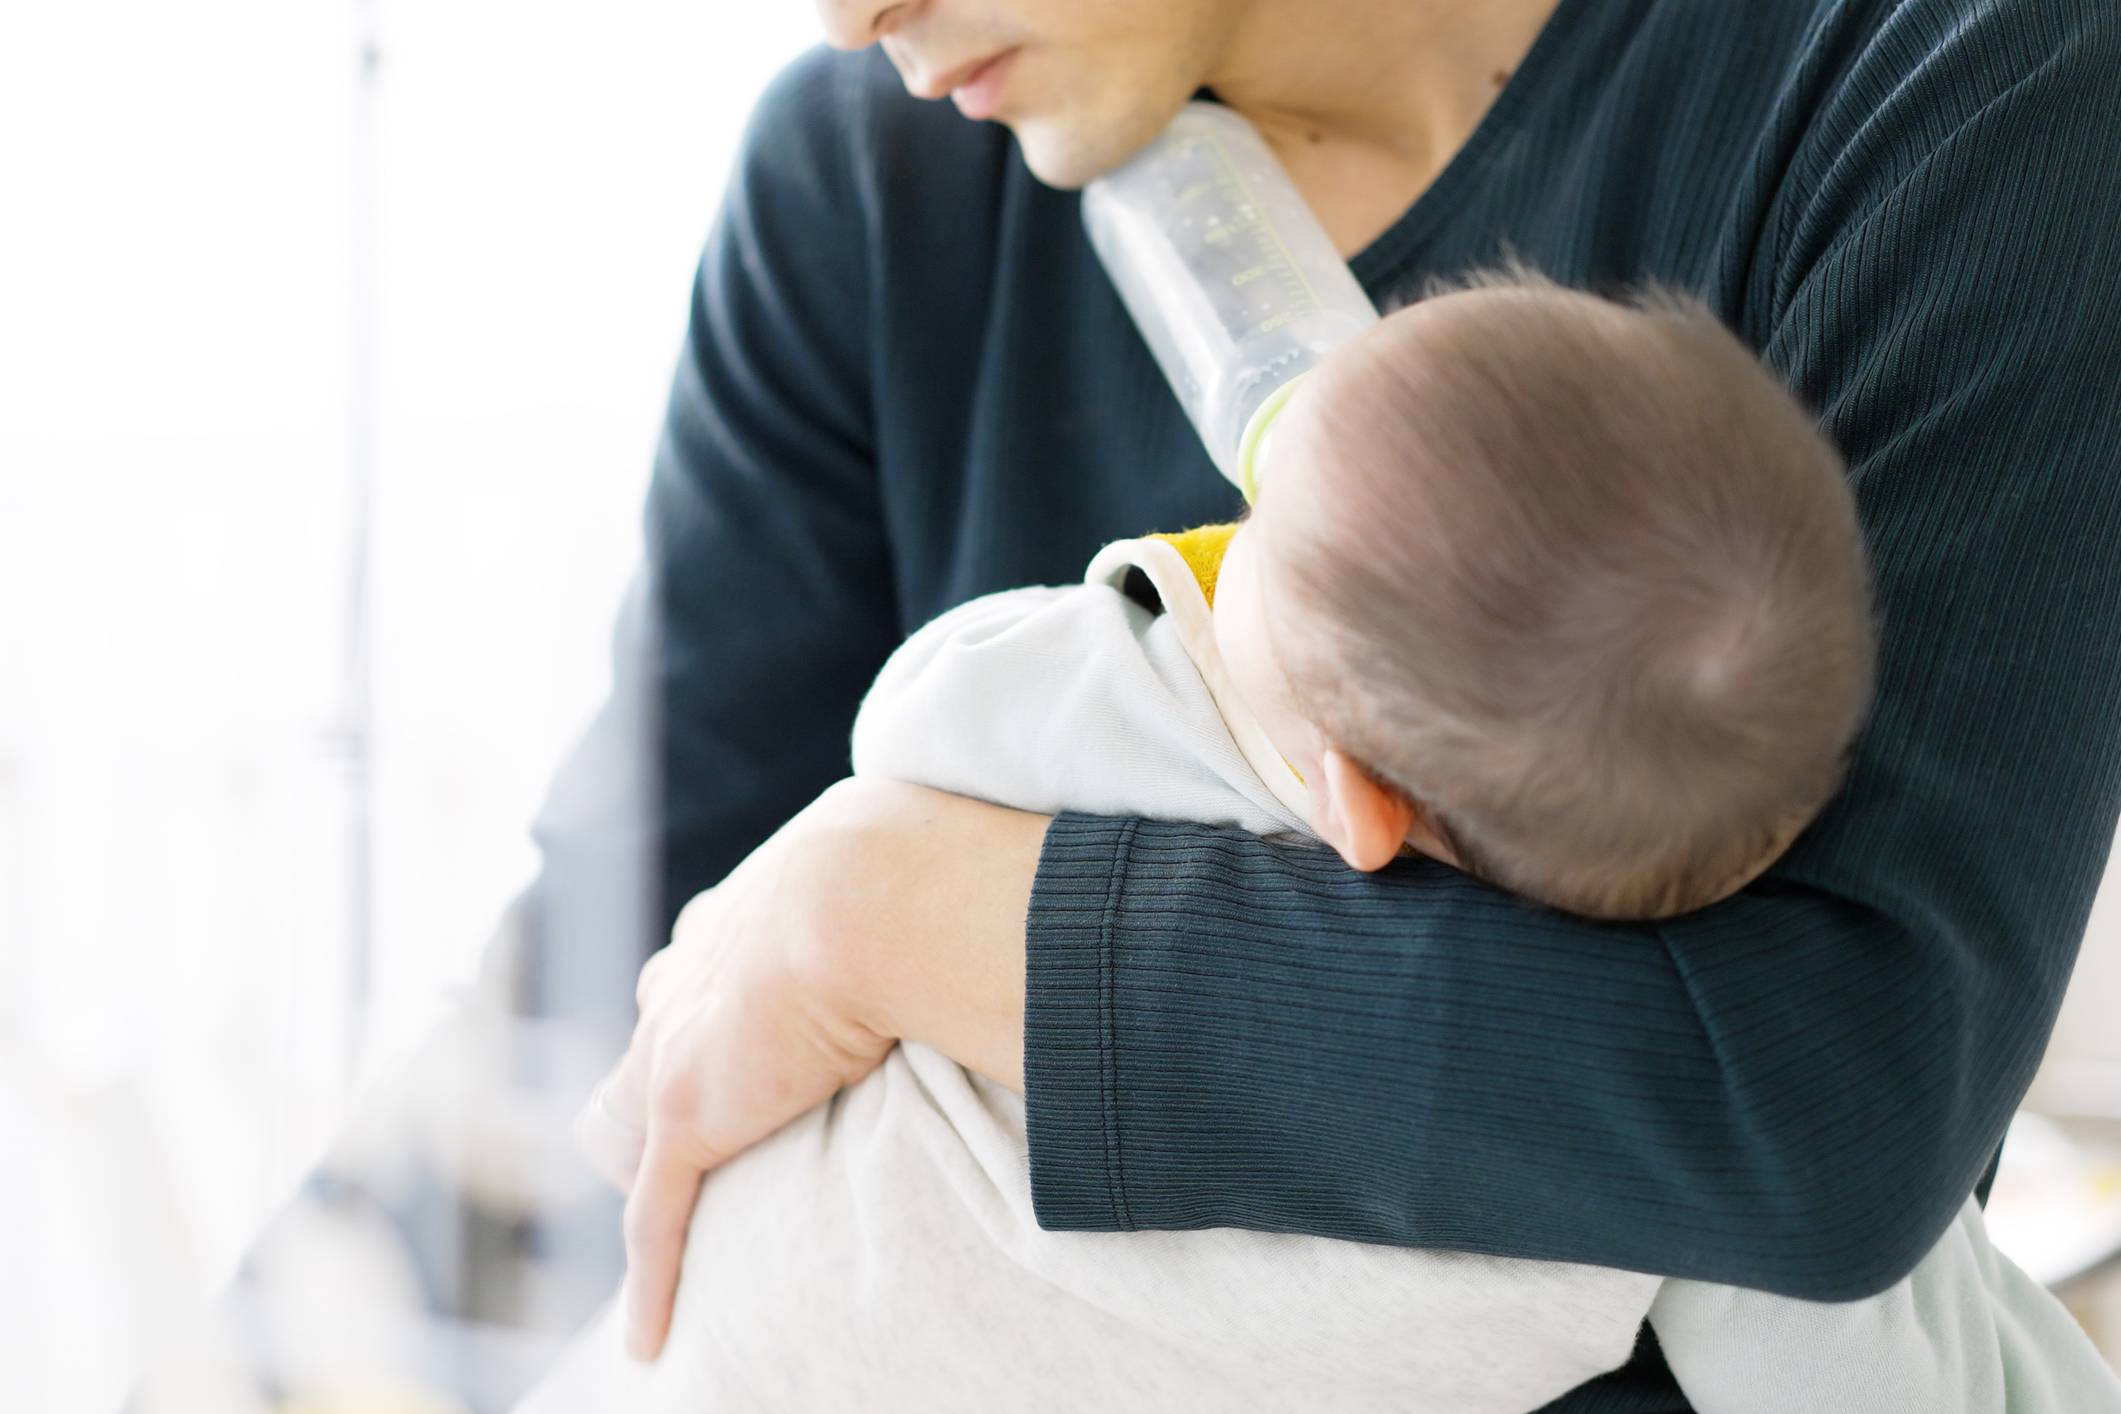 The percentage of men taking child care leave in Japan rose to 13.97% last year, up 1.32 points from the year before and marking the highest ratio ever, a labor ministry survey shows. | GETTY IMAGES